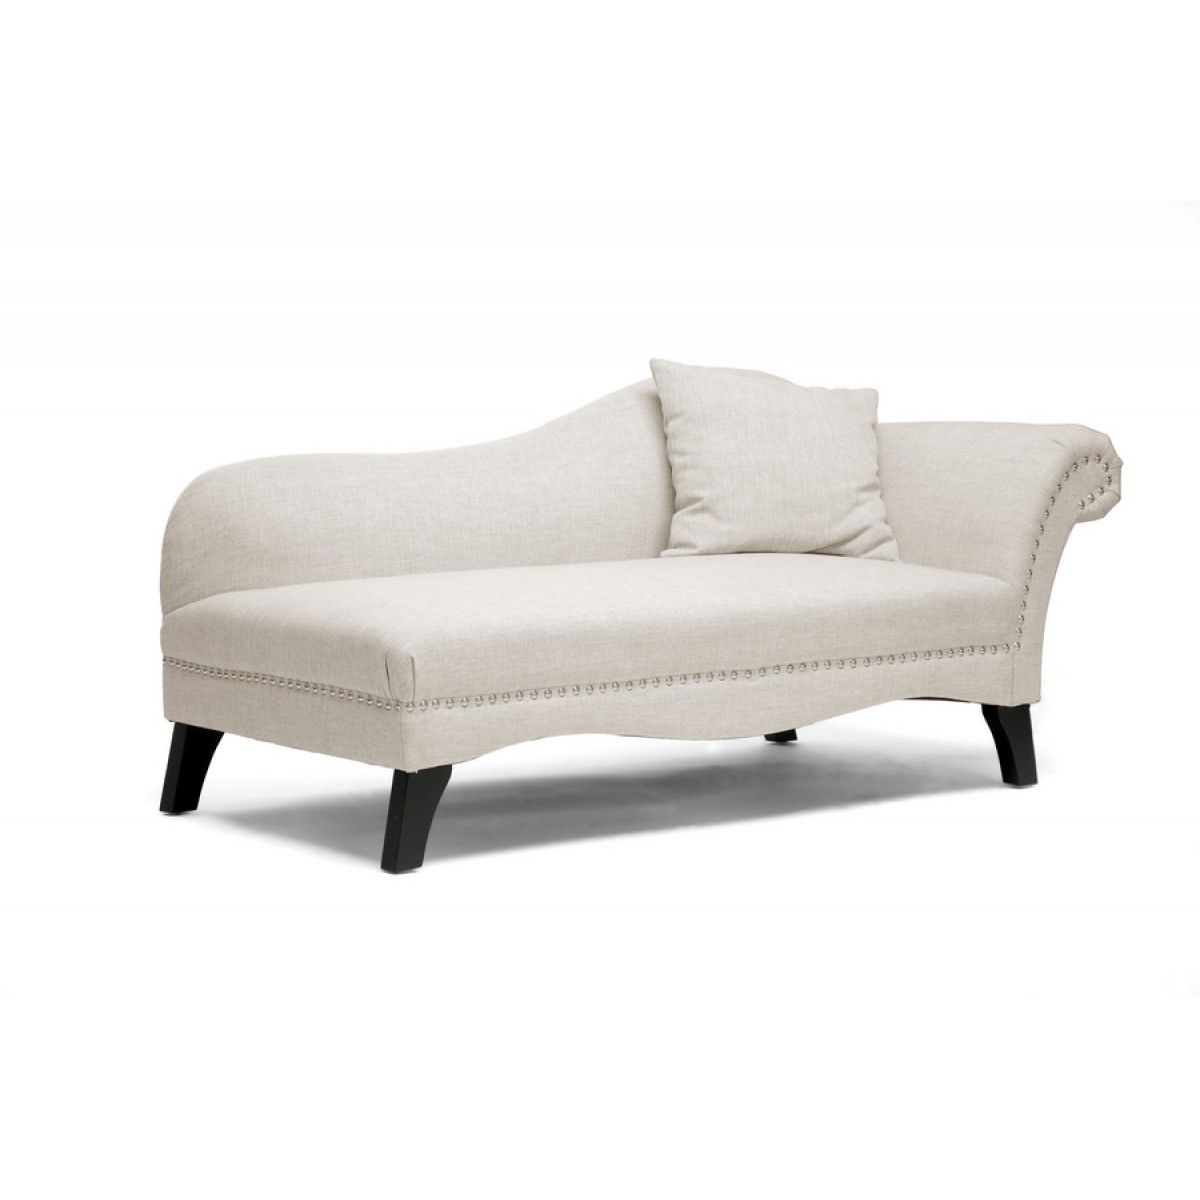 See White With Regard To Setoril Modern Sectional Sofa Swith Chaise Woven Linen (View 18 of 25)